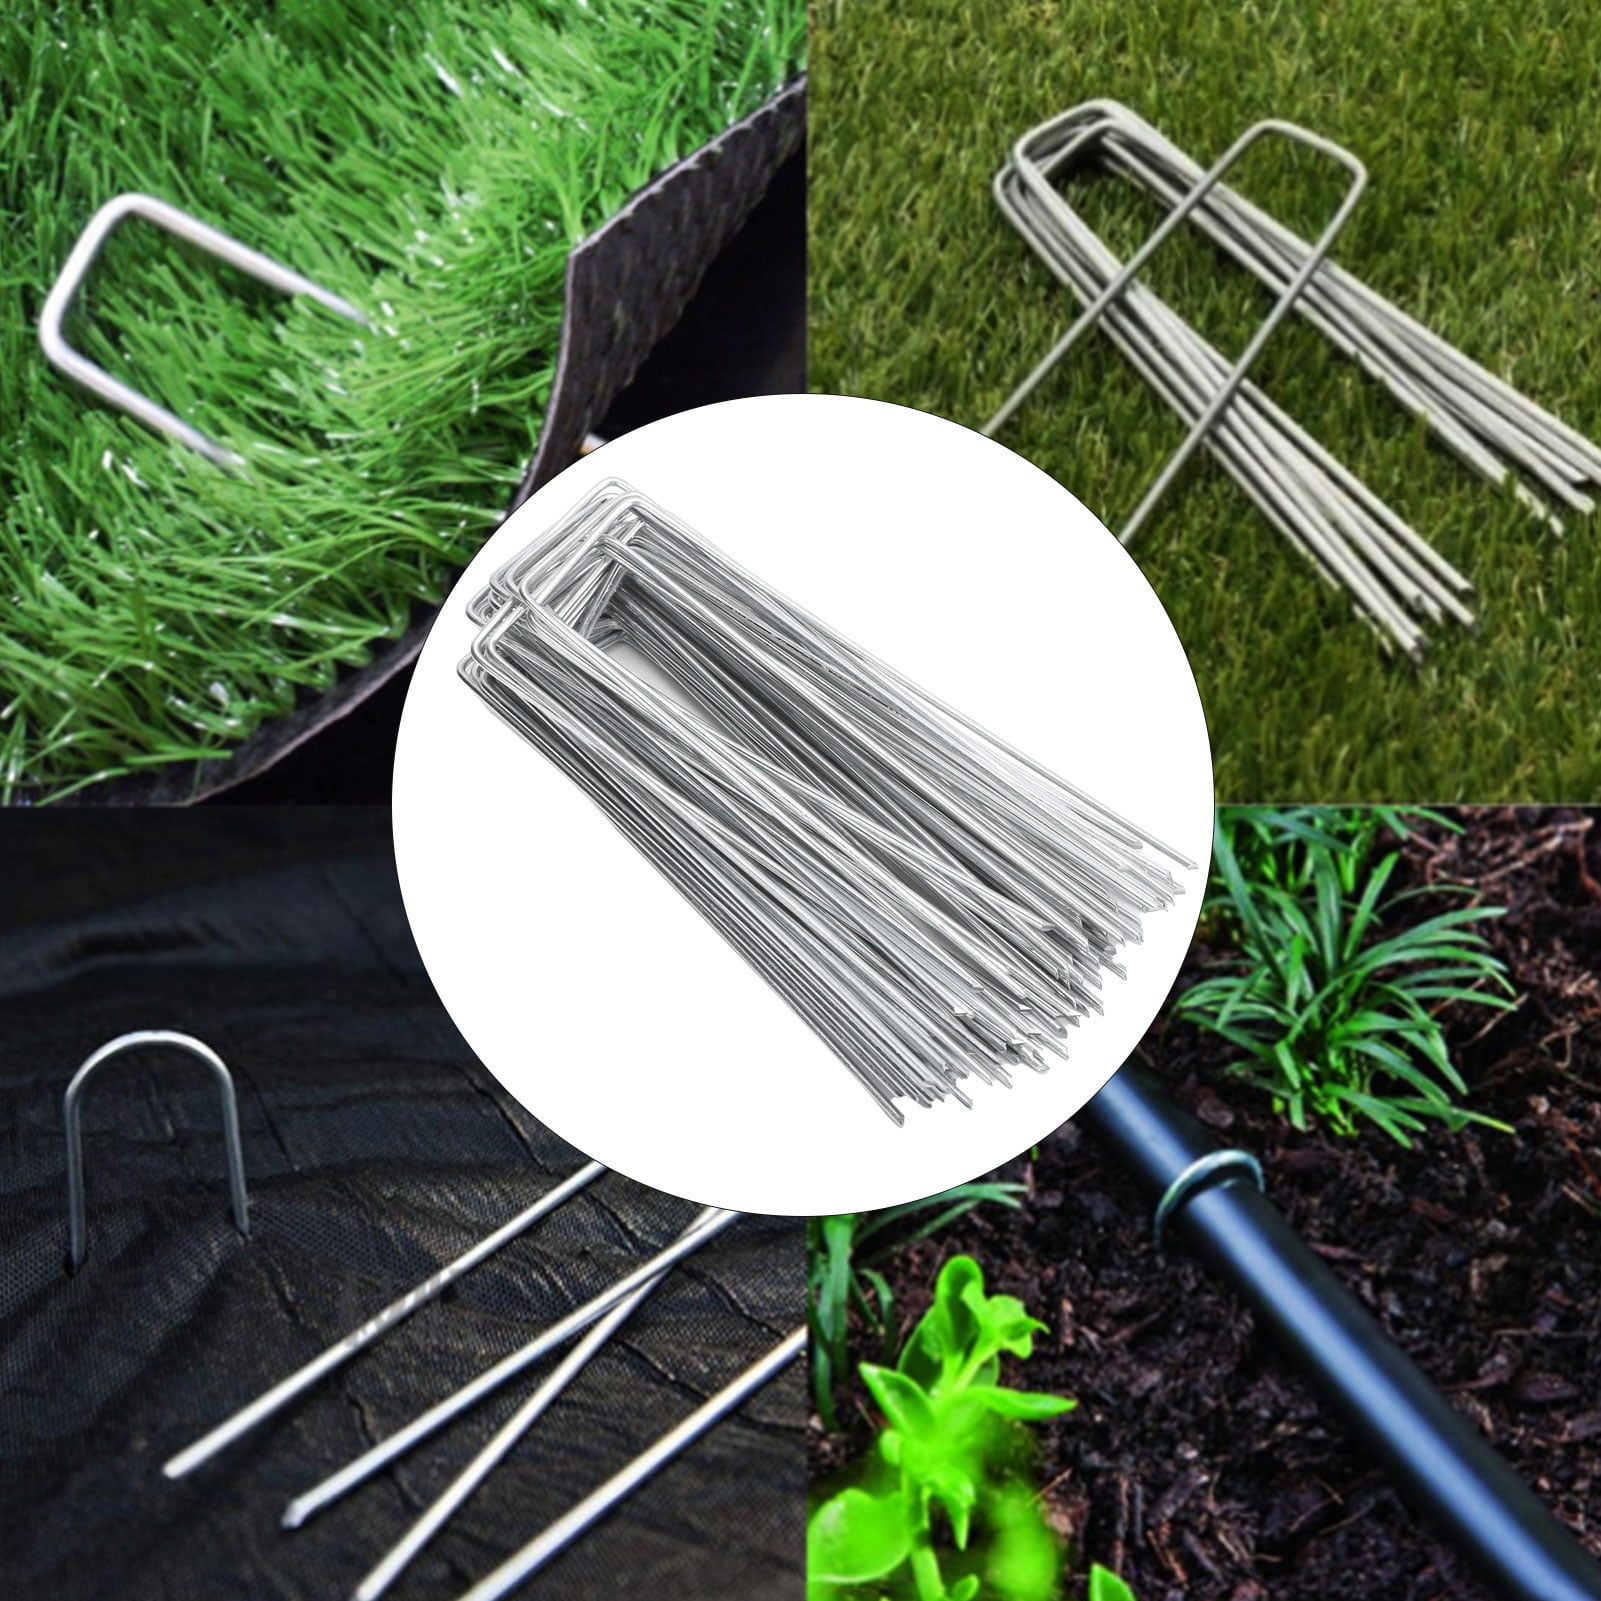 ARTIFICIAL GRASS LAWN STAPLES GROUND PEGS PINS WEED CONTROL FABRIC SHEET NETS 